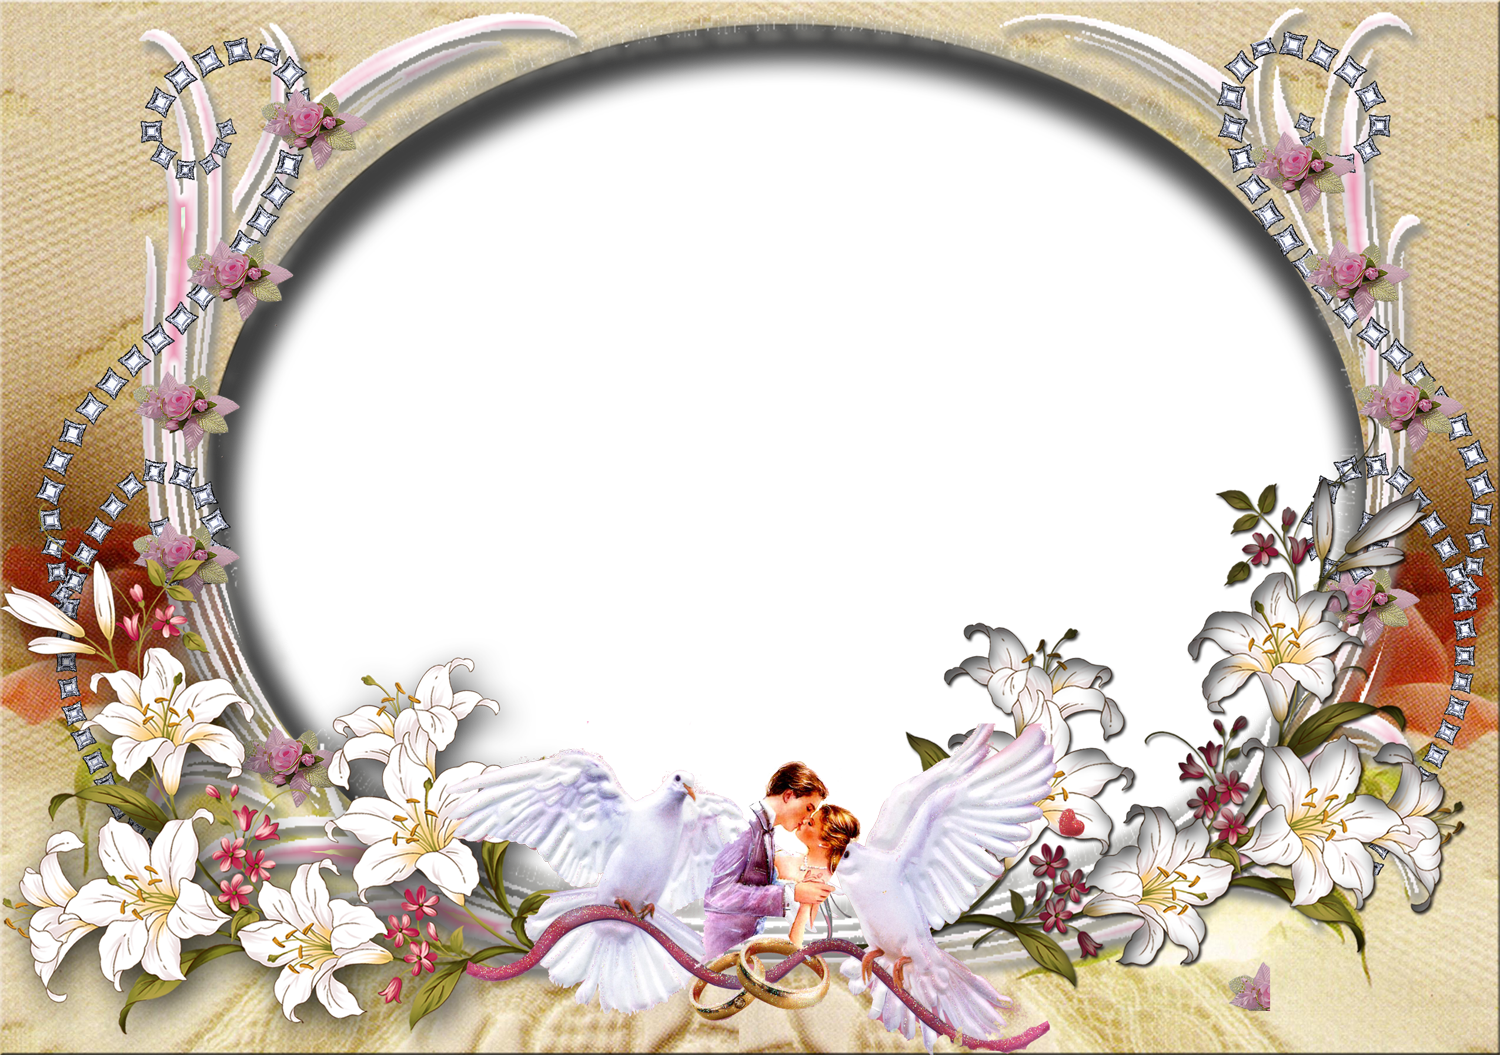 Background Clipart For Photoshop - Background Images For Photoshop Wedding (1500x1055)